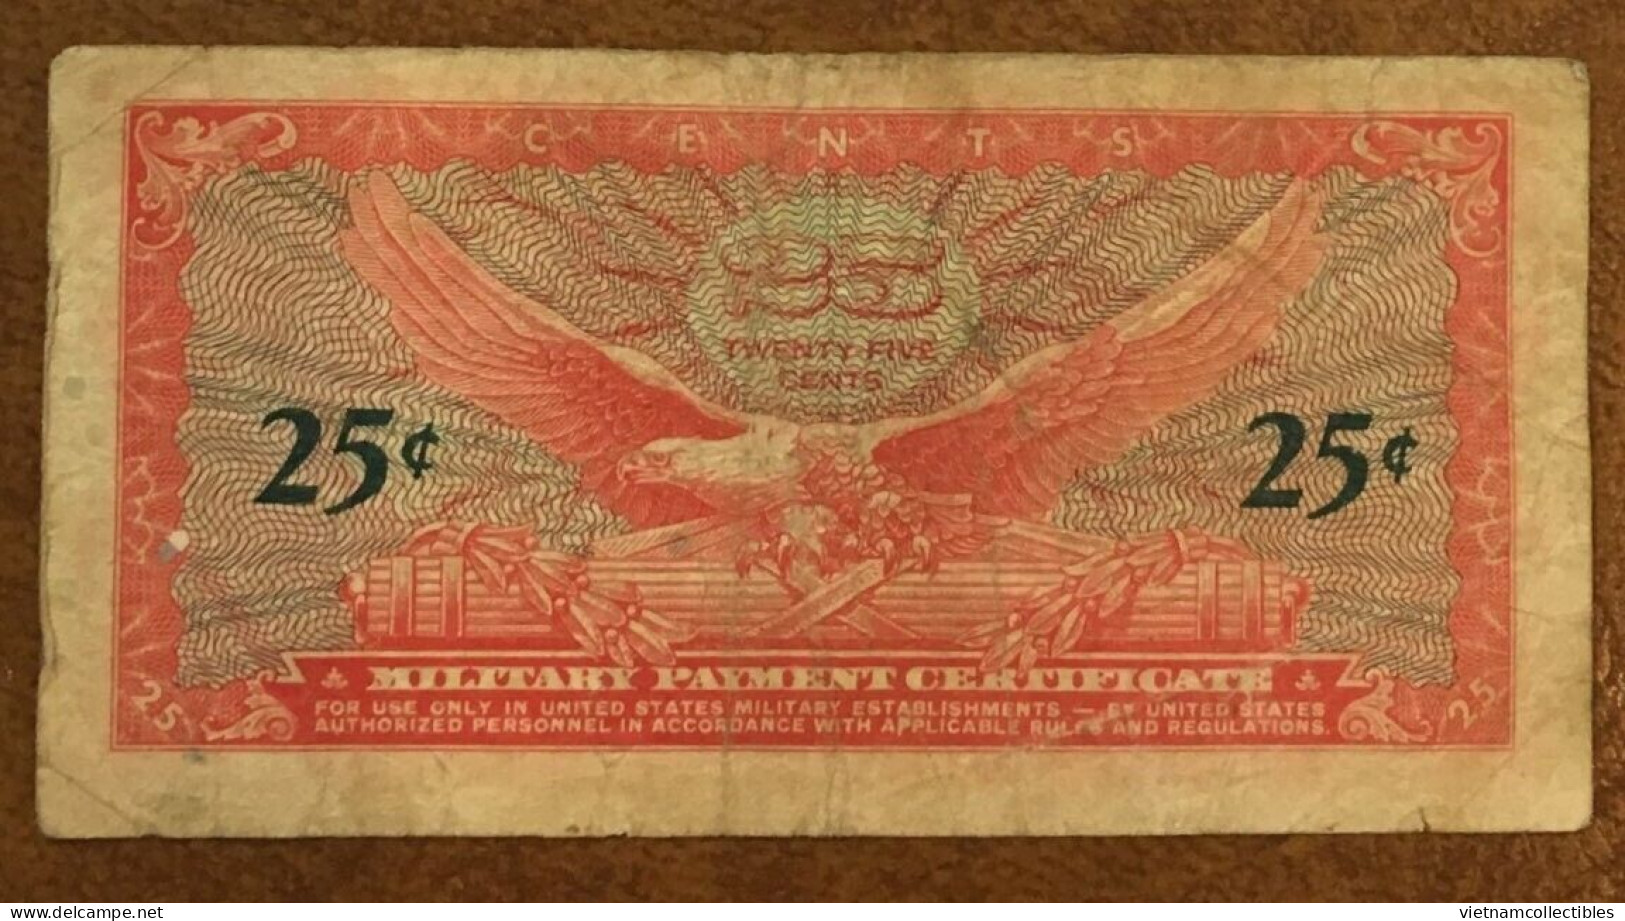 USA MPC 25 Cents Military Payment Series 641 VF Banknote Note 1964 Using In Vietnam Viet Nam - Plate # 8 / 2 Photos - 1965-1968 - Series 641